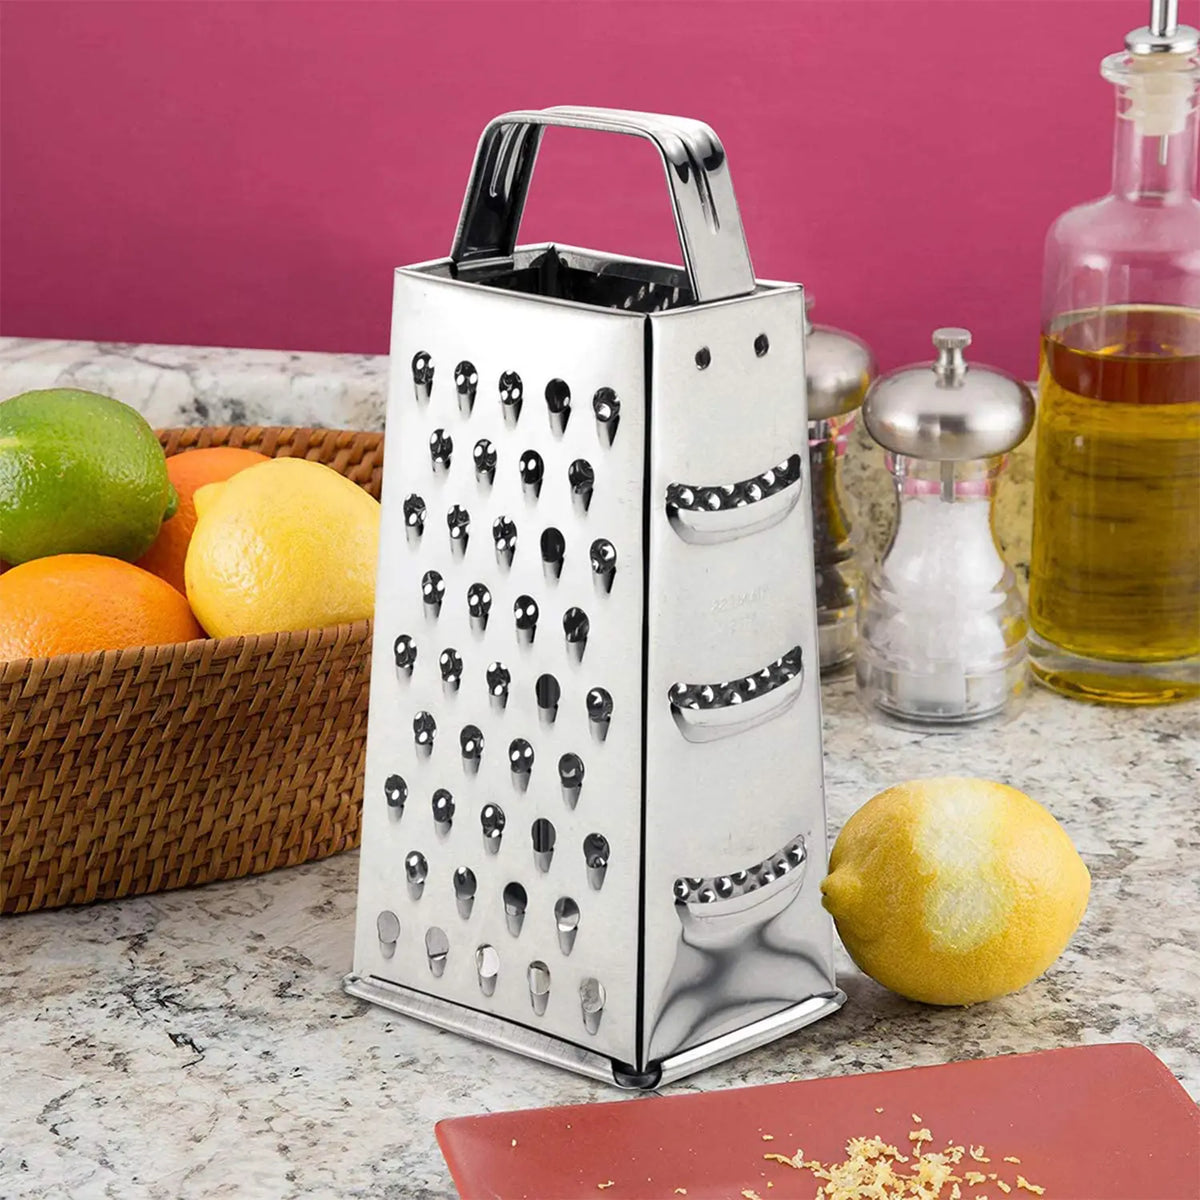 SUNNEX Stainless Steel Four-Sided Cheese Grater